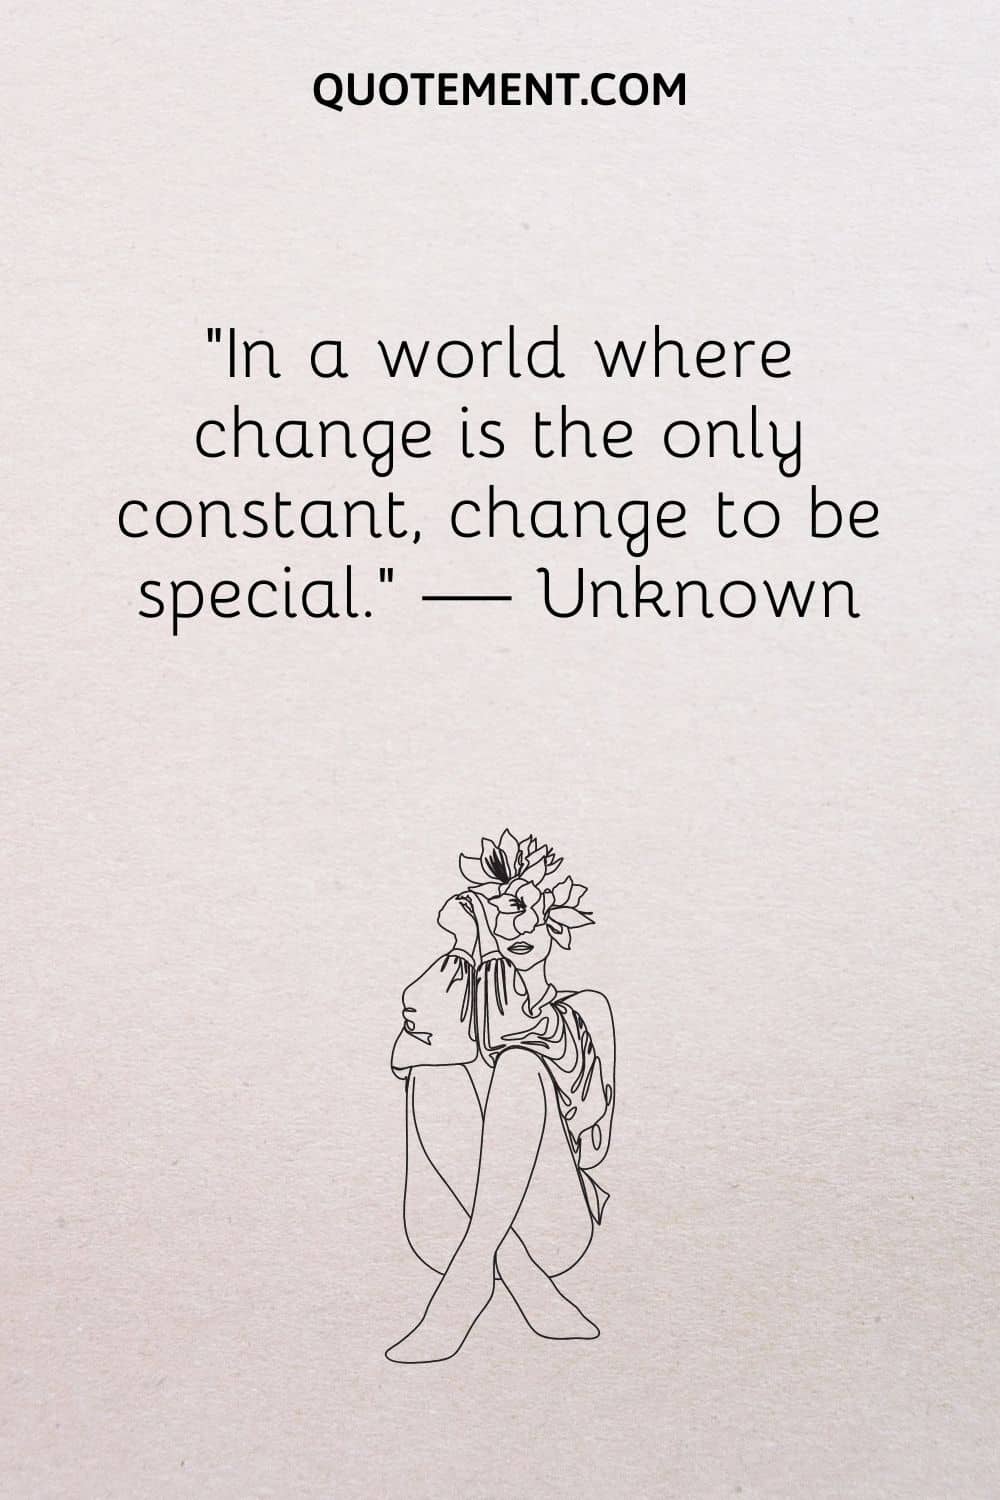 change to be special